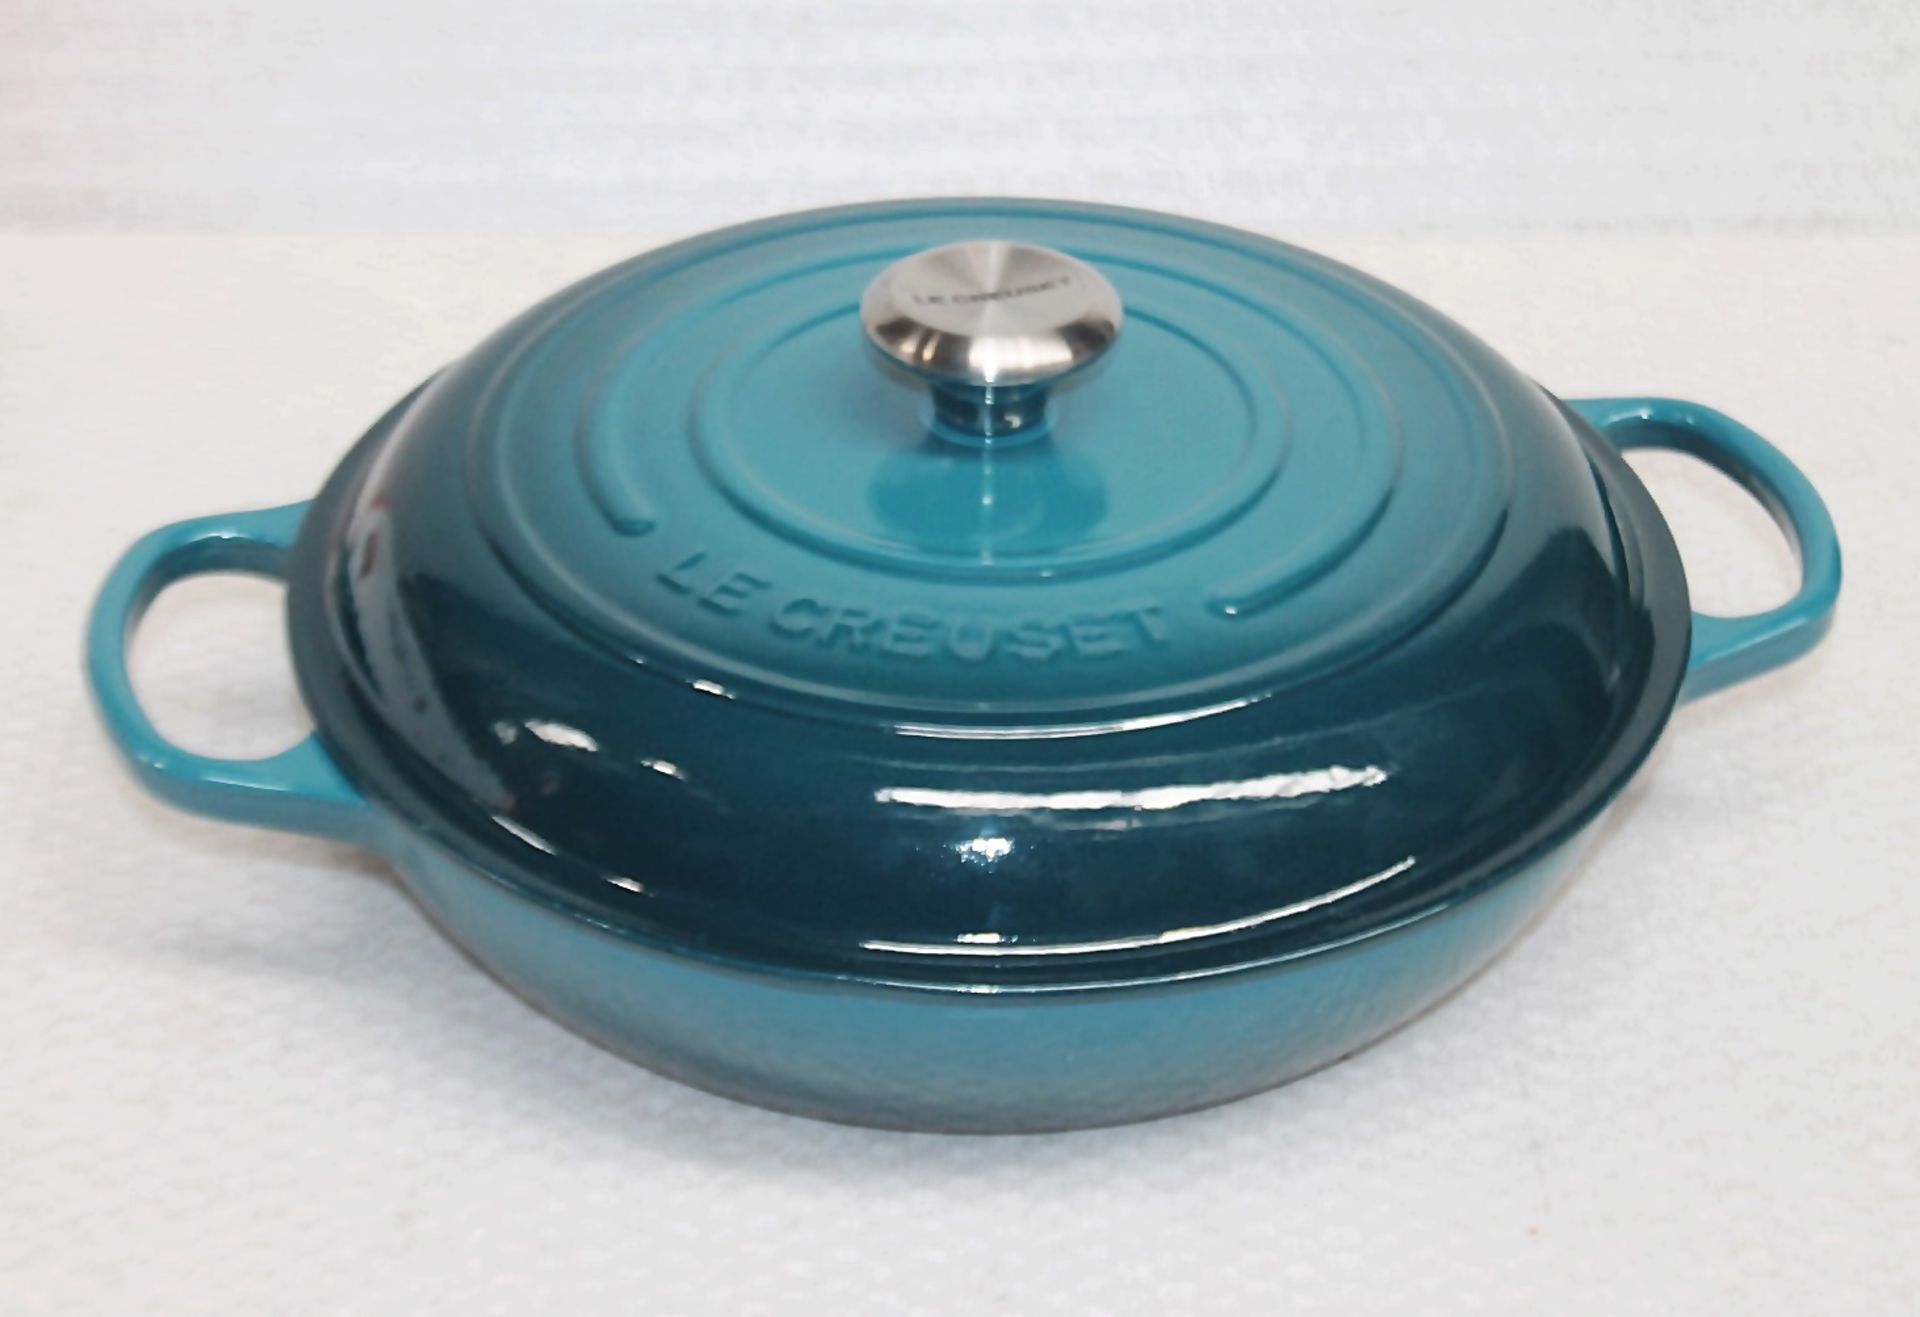 1 x LE CREUSET 'Signature' Enamelled Cast Iron Shallow Casserole Dish In Teal - RRP £270.00 - Image 2 of 13